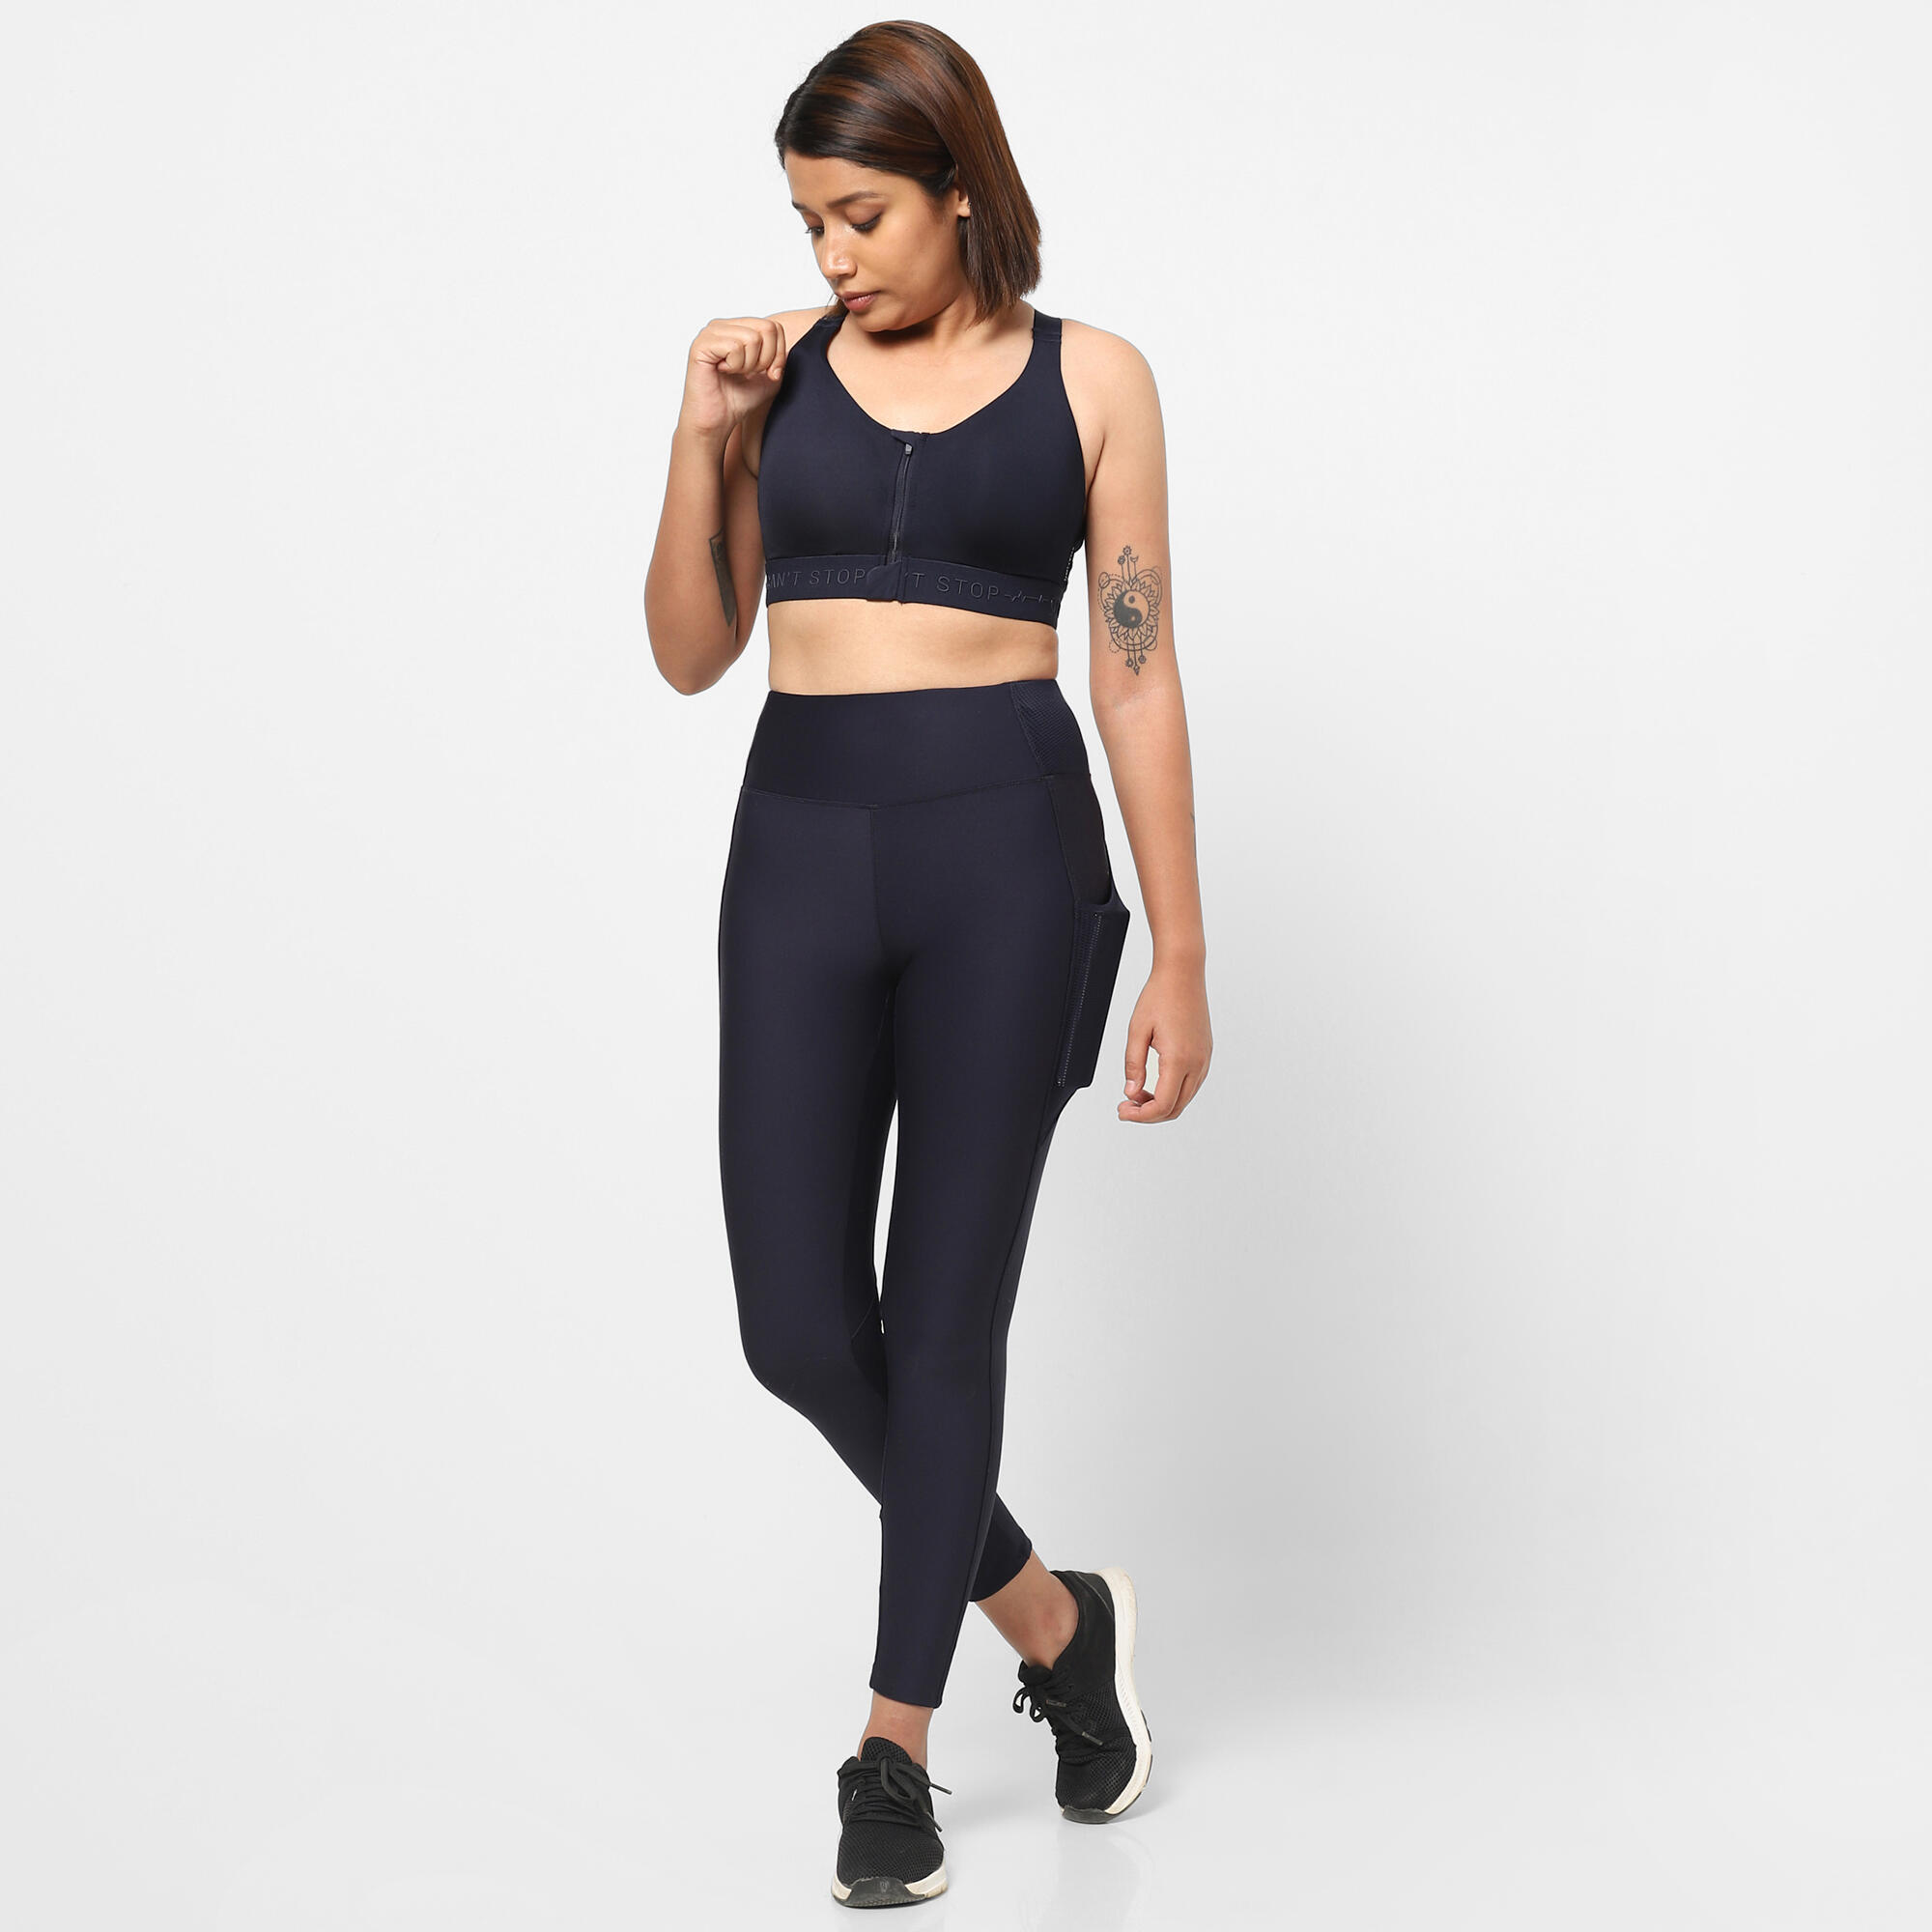 Signature Scrunch Ankle Length Leggings - Midnight - Muscle Nation